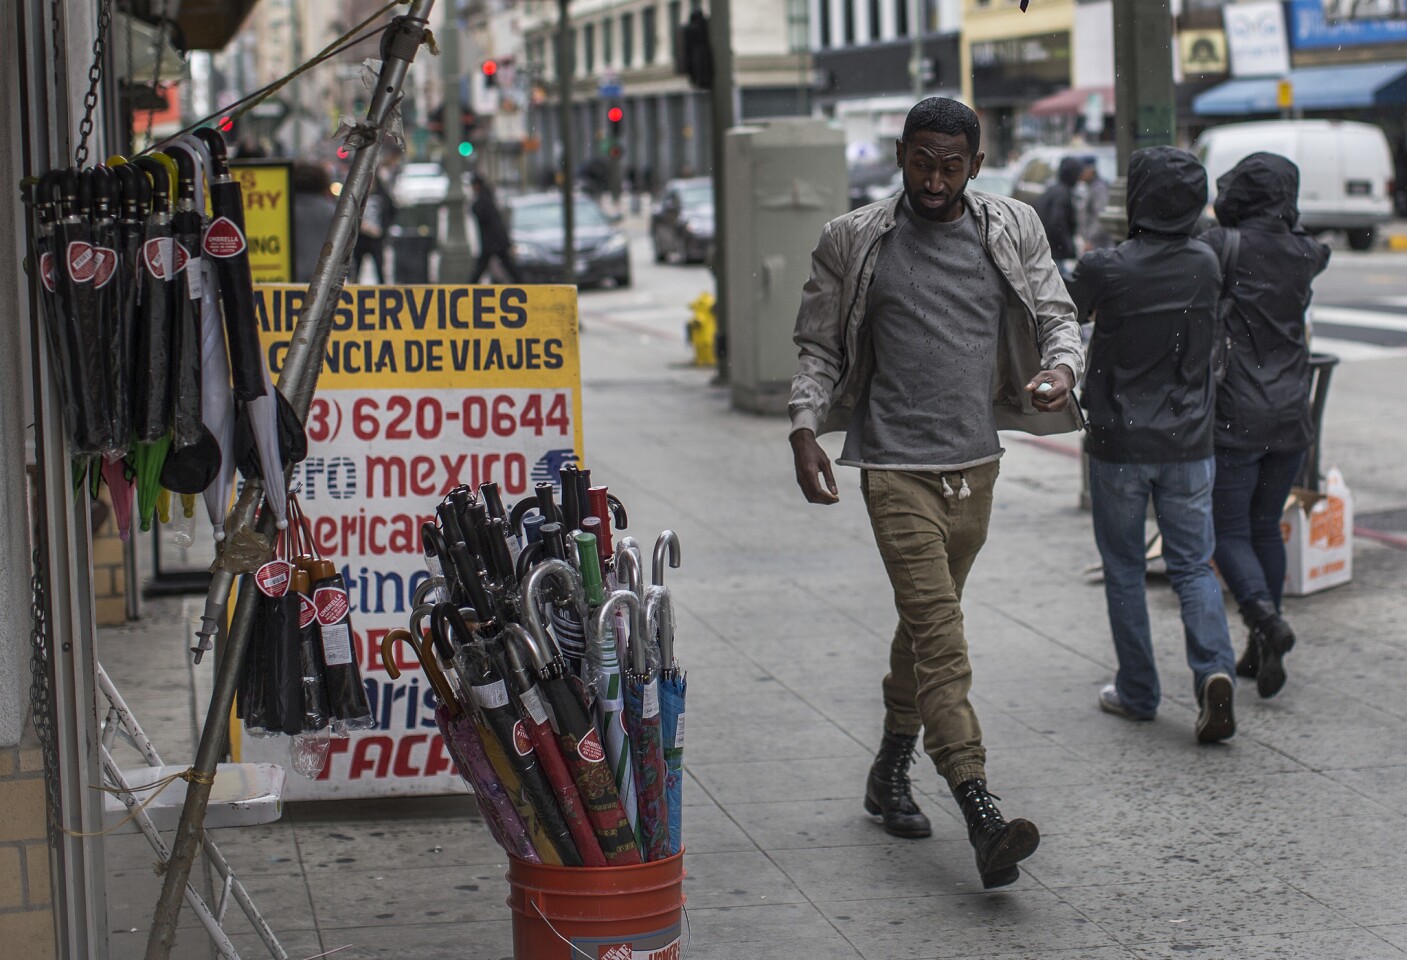 A man eyes an umbrella stand as April showers fall in dowtown Los Angeles Saturday.